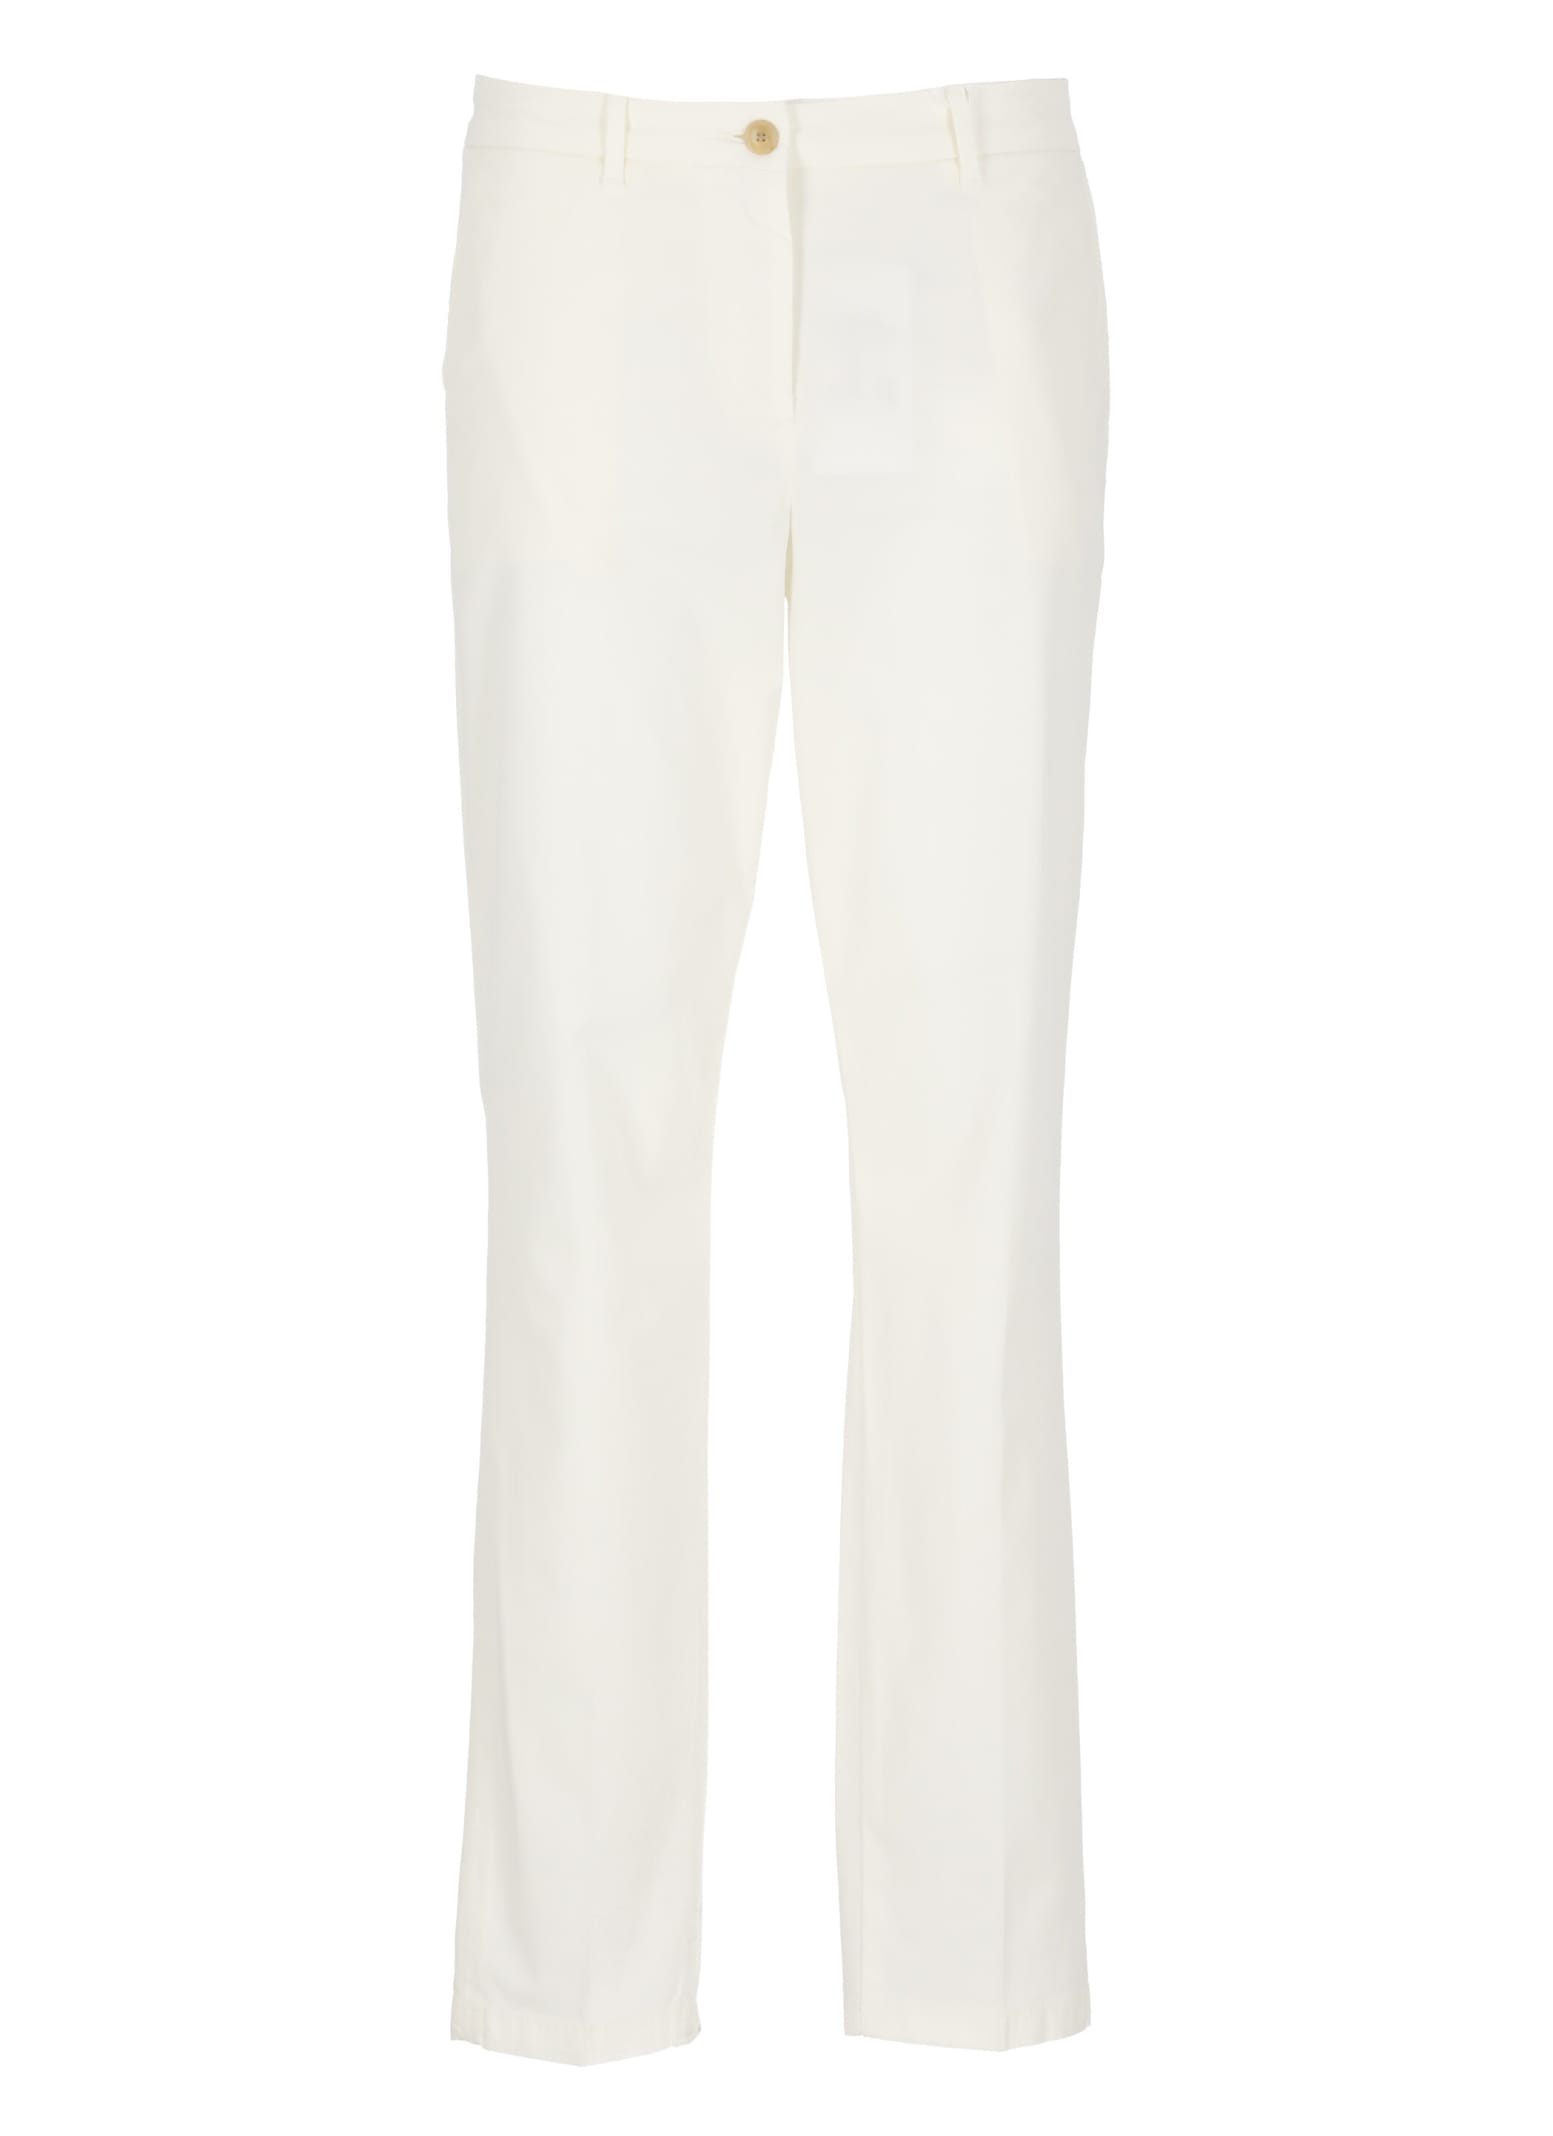 TOMMY HILFIGER COTTON TROUSERS